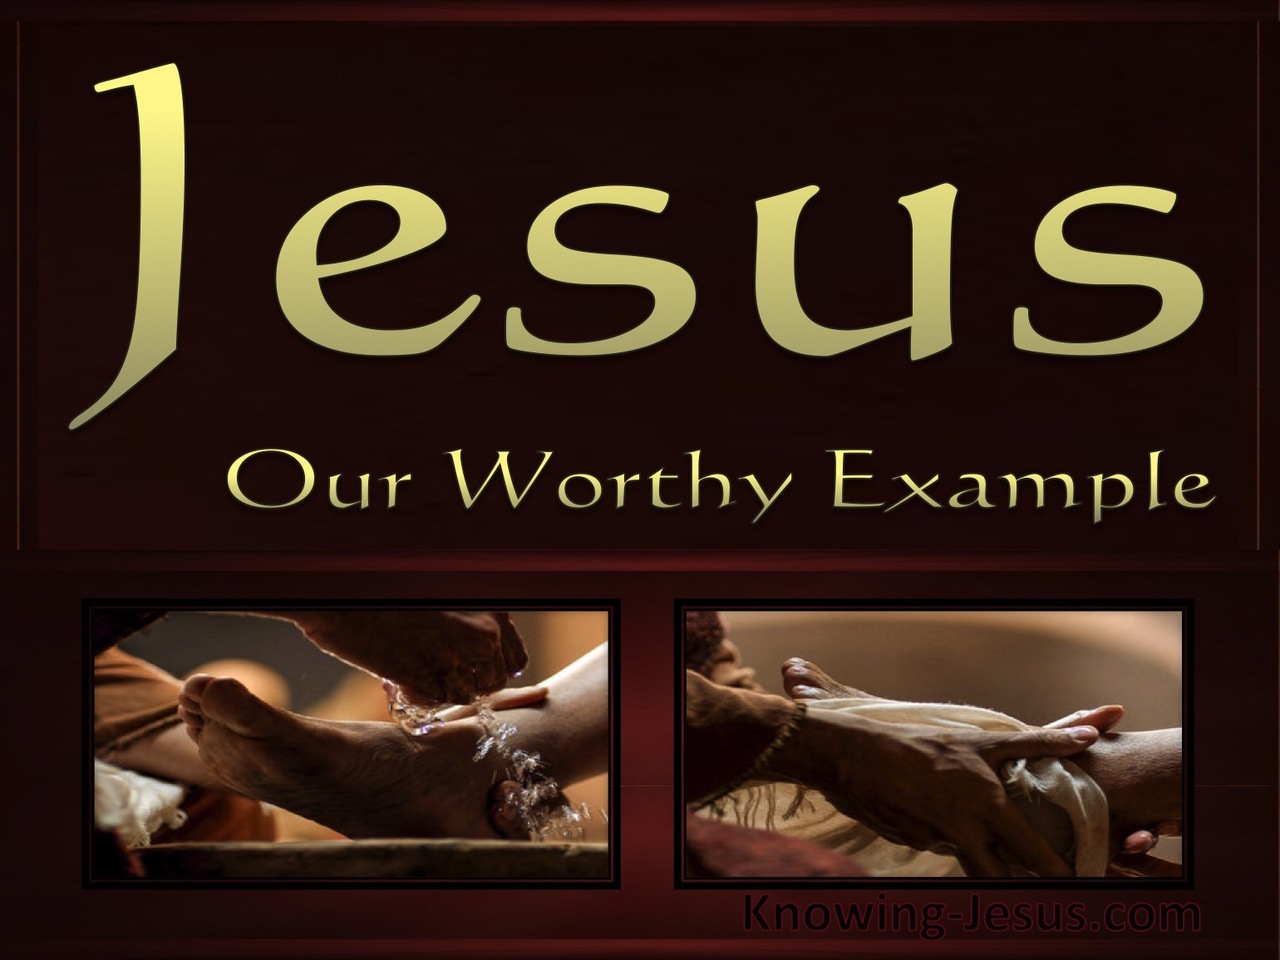 Jesus Our Worthy Example (devotional)01-29 (gold)